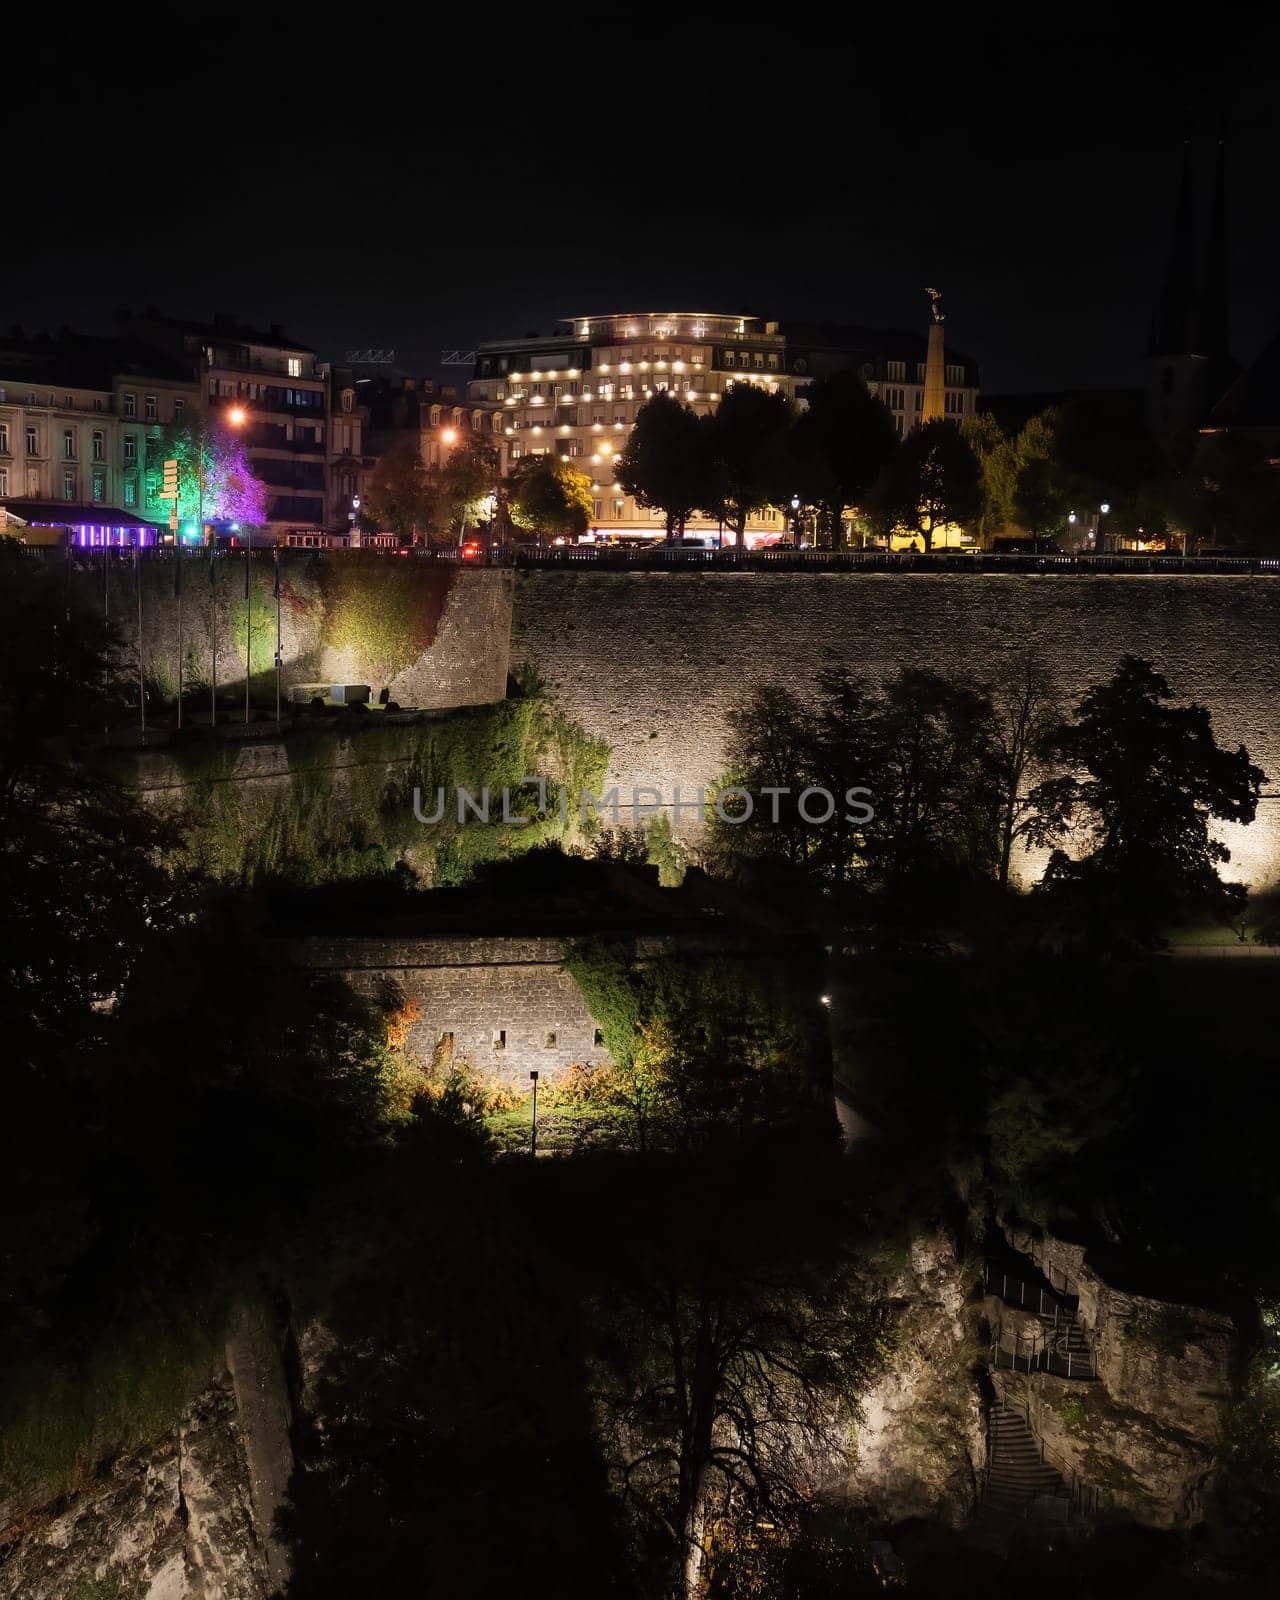 Evening city building and illuminated castle ruins by apavlin